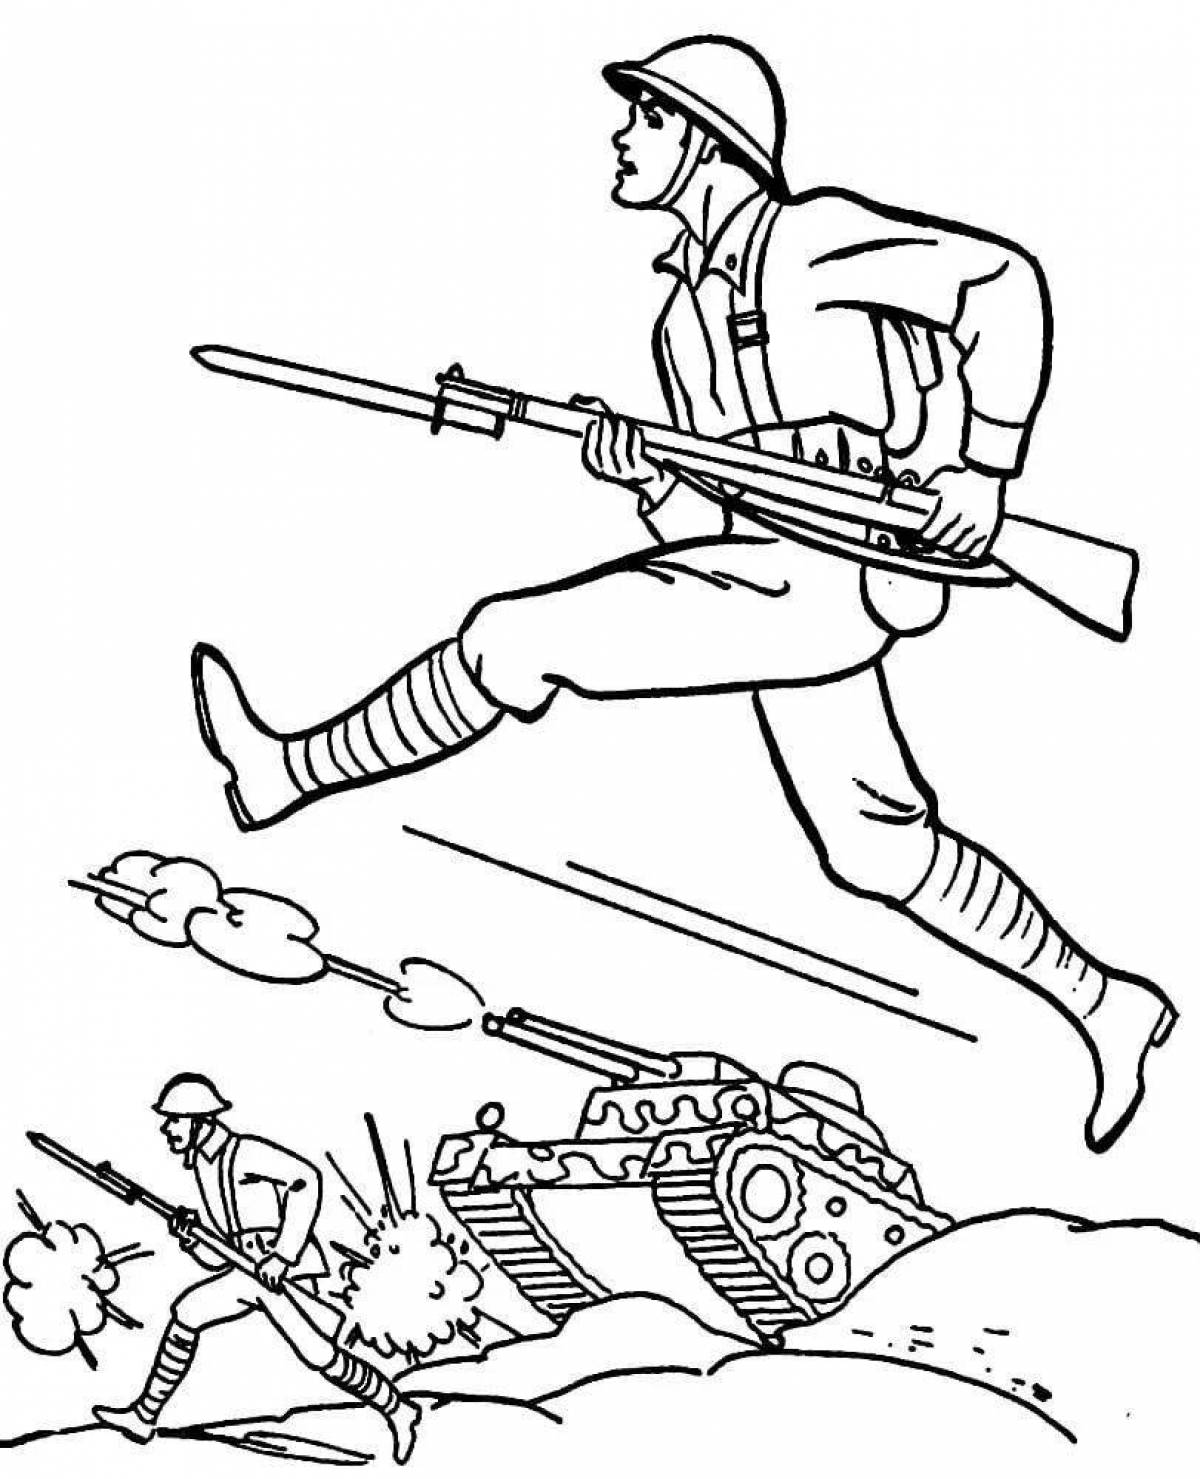 Inspirational Russian soldier coloring book for kids